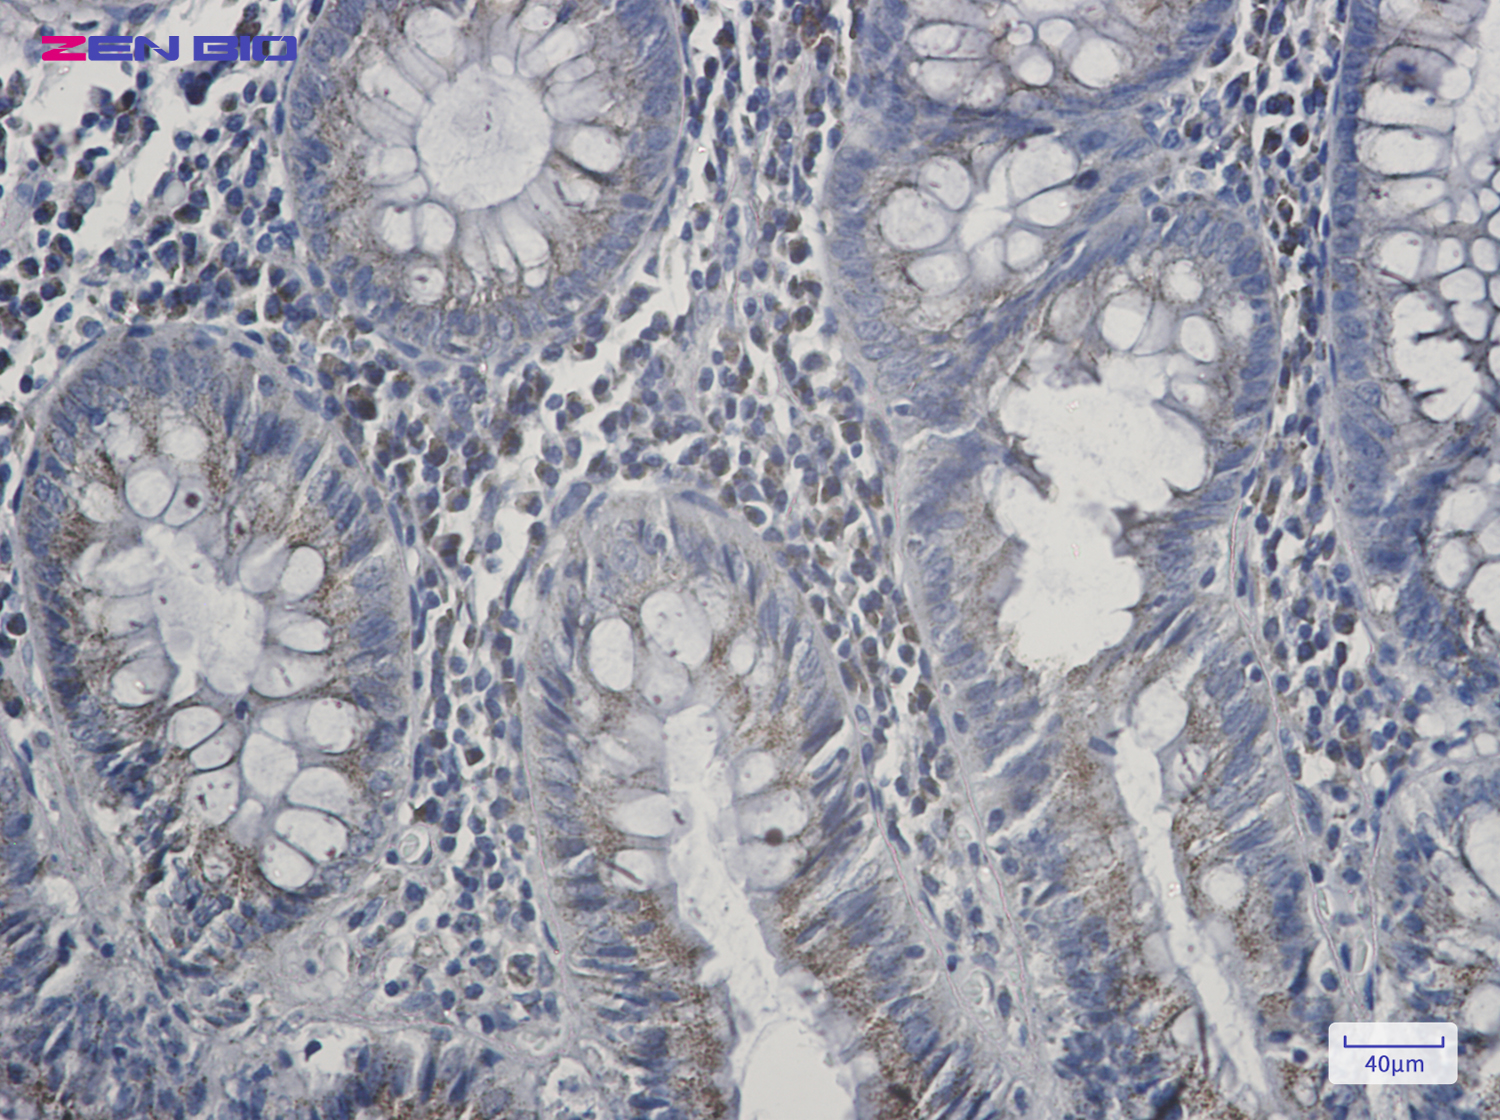 Immunohistochemistry of Alkyl-DHAP synthase in paraffin-embedded Human colon cancer tissue using Alkyl-DHAP synthase Rabbit pAb at dilution 1/20